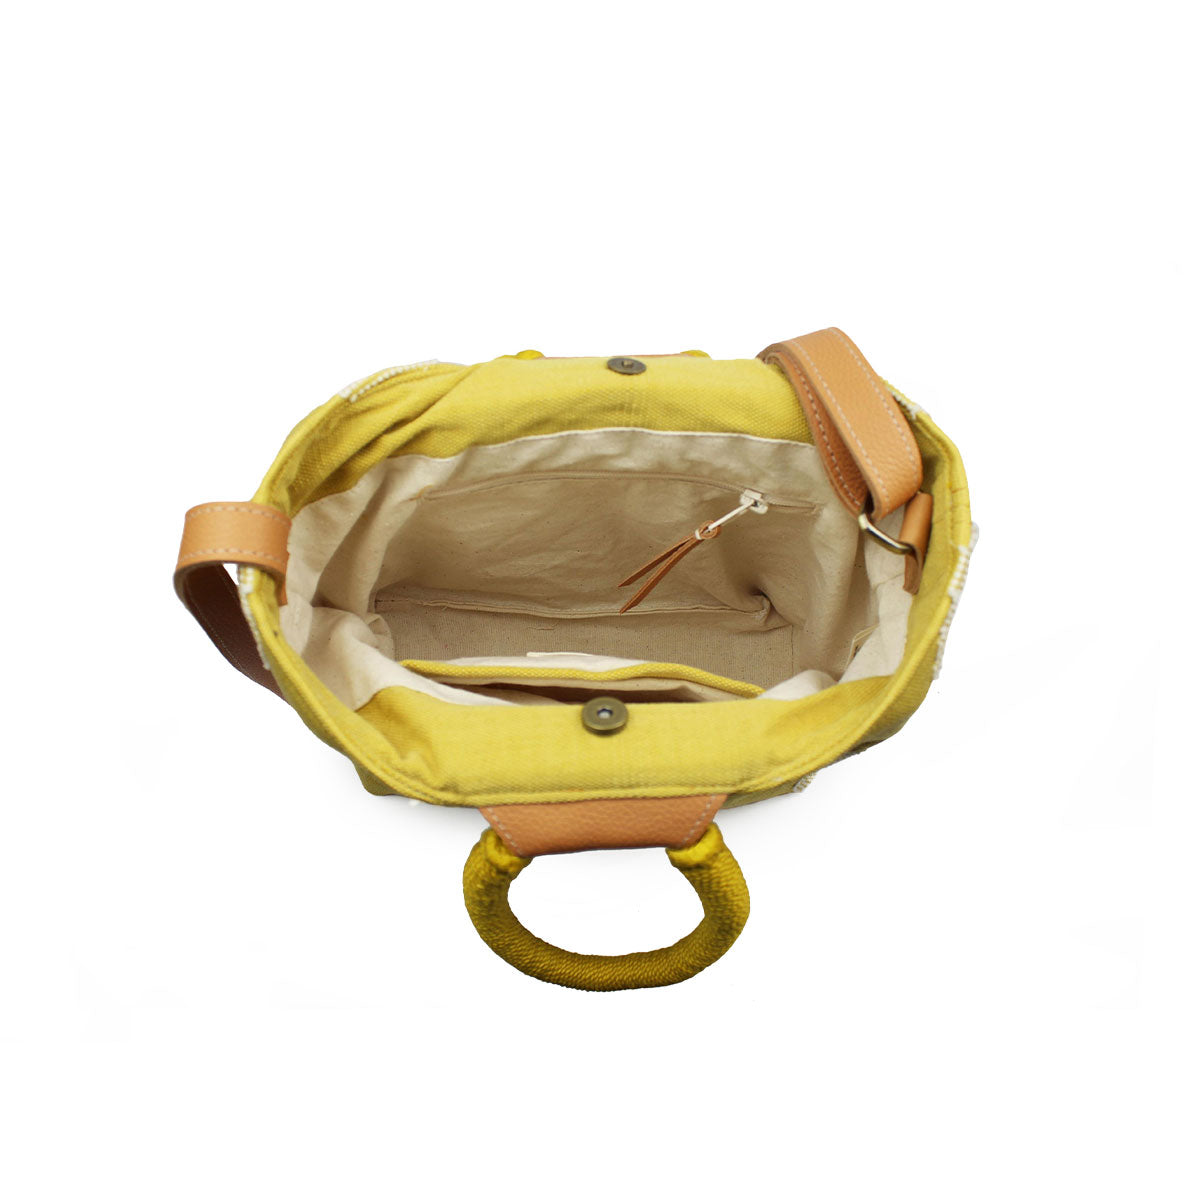 Another top view of the interior of the artisan hand woven Dalila Midi Tote in Sunrise Yellow. The view shows the pocket with a leather zipper pull across from the open pocket. It has a magnetic clasp.